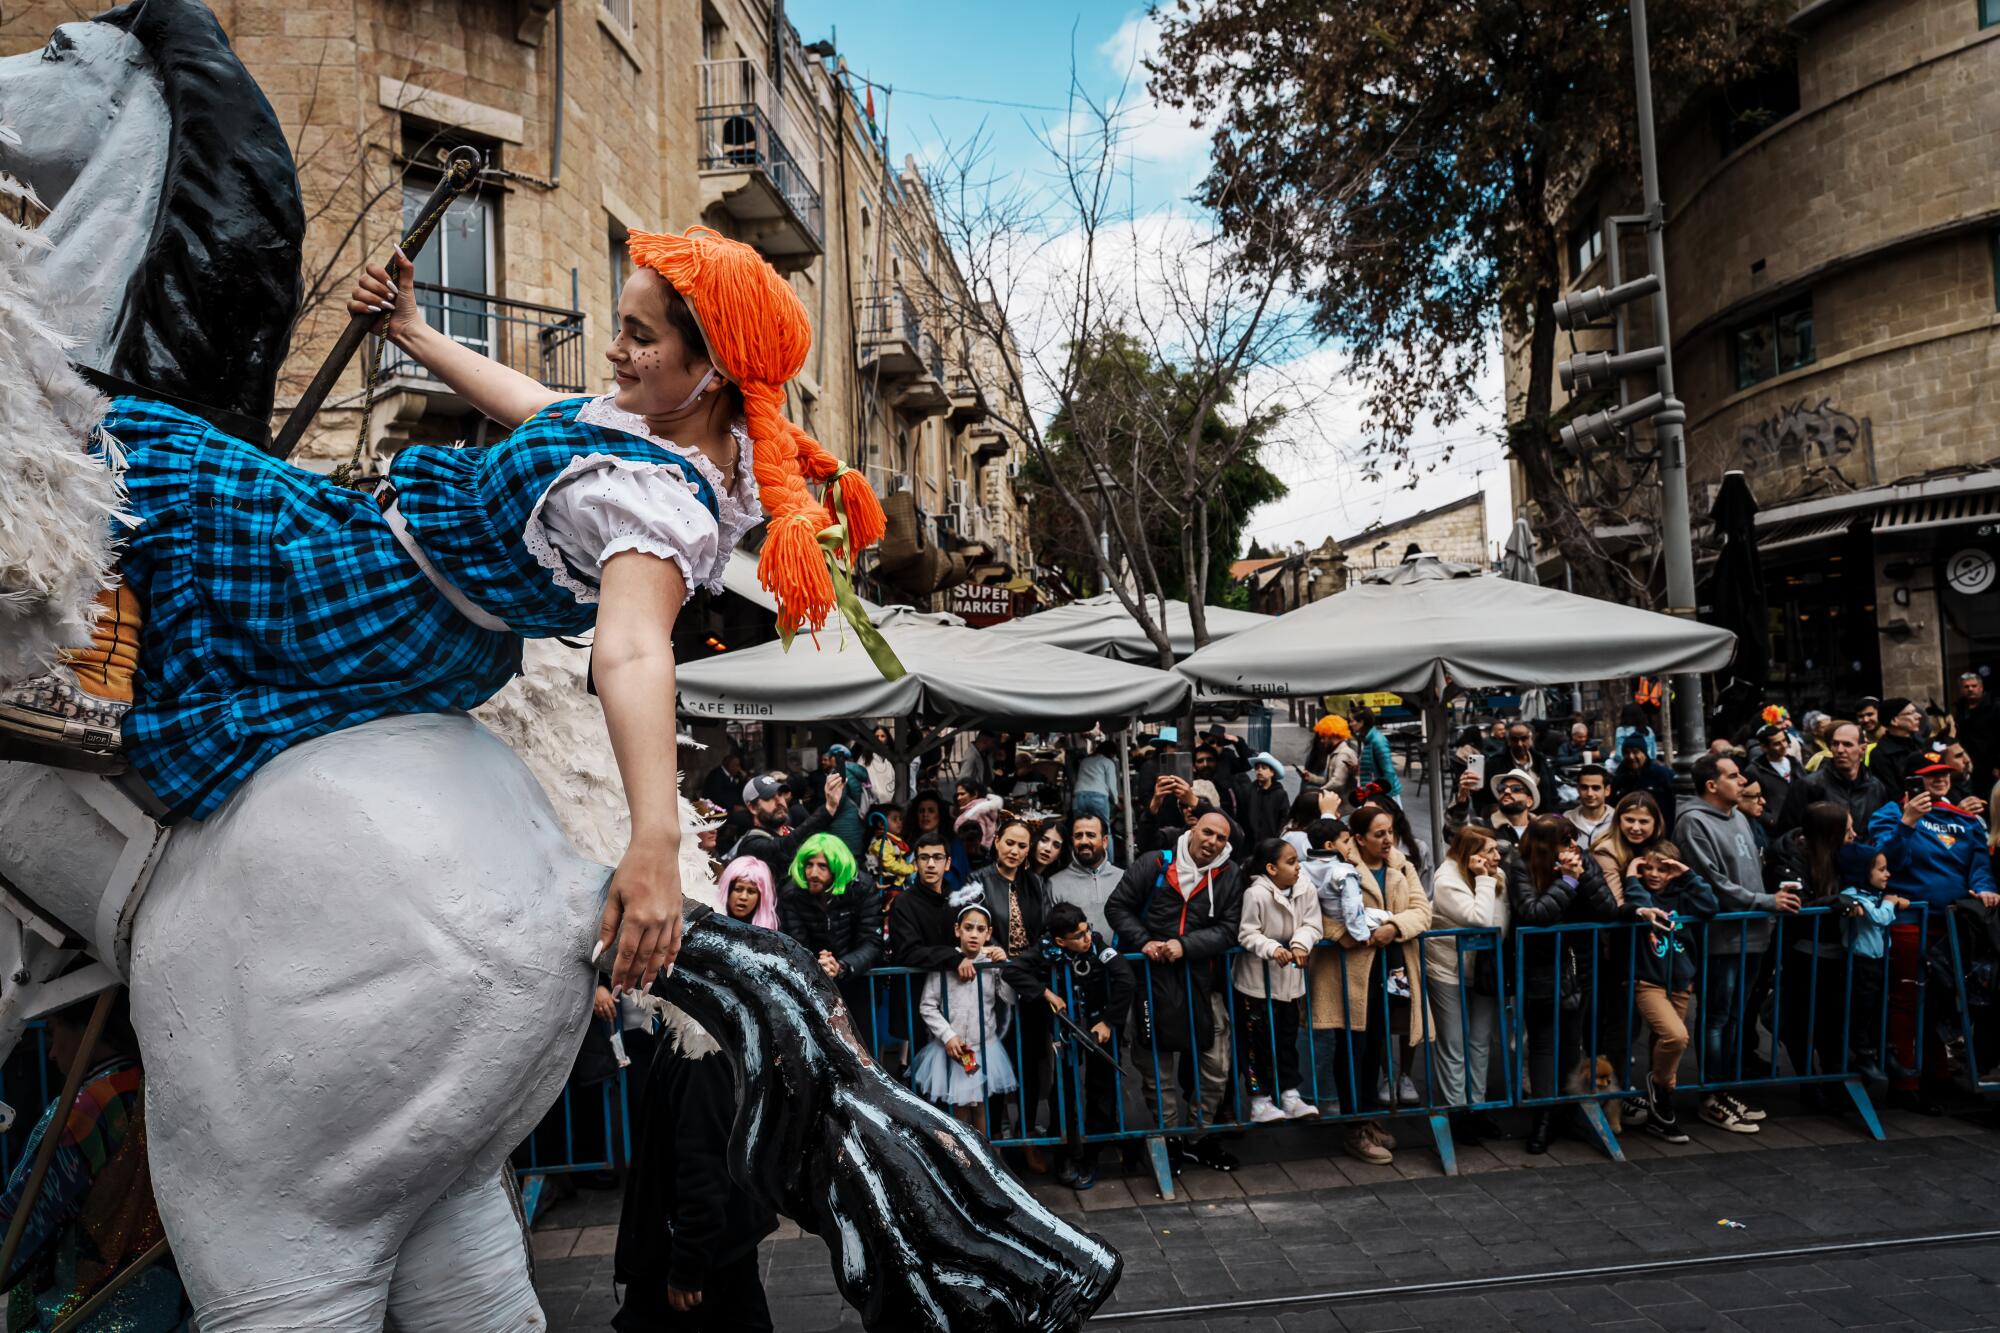 A parade celebrating the holiday of Purim is the first such commemoration in Jerusalem in four decades.